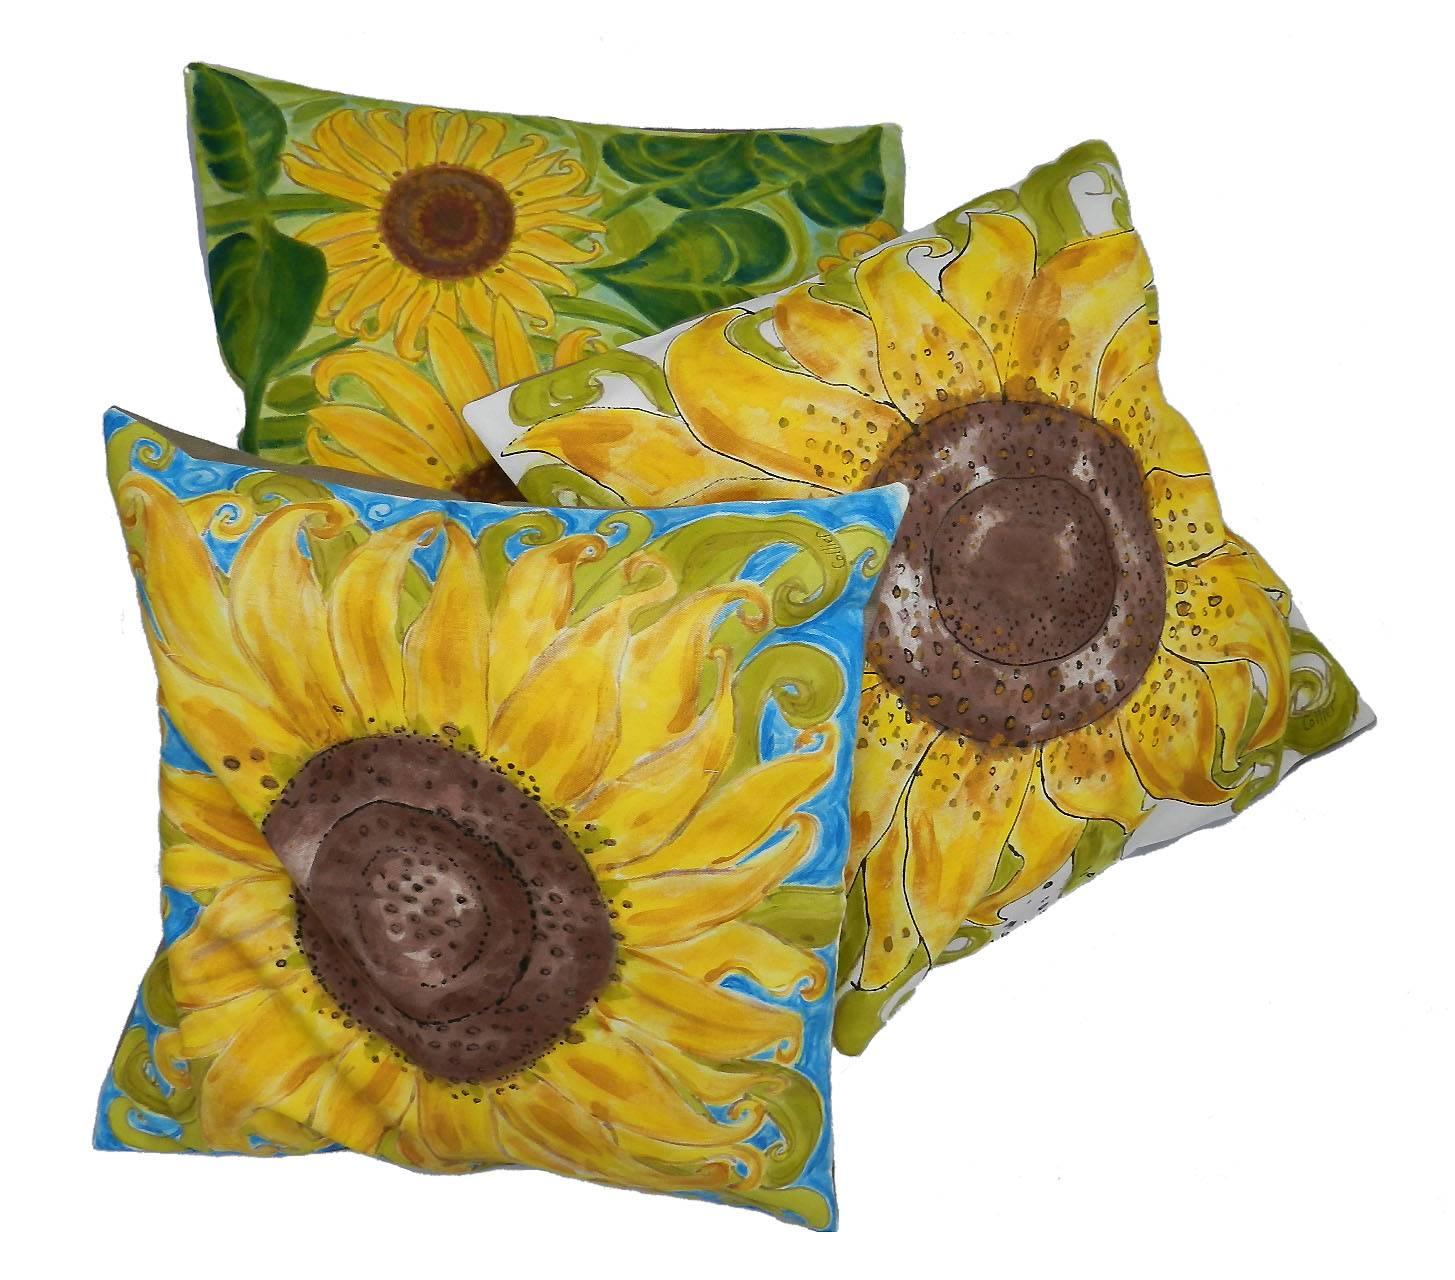 One of a kind throw pillow hand-painted sunflower unique cushion signed by the artist
Joan Collier uses an illustrative quality based on observation, memory and imagination, her work has a distinct style which is rich and colourful with a strong